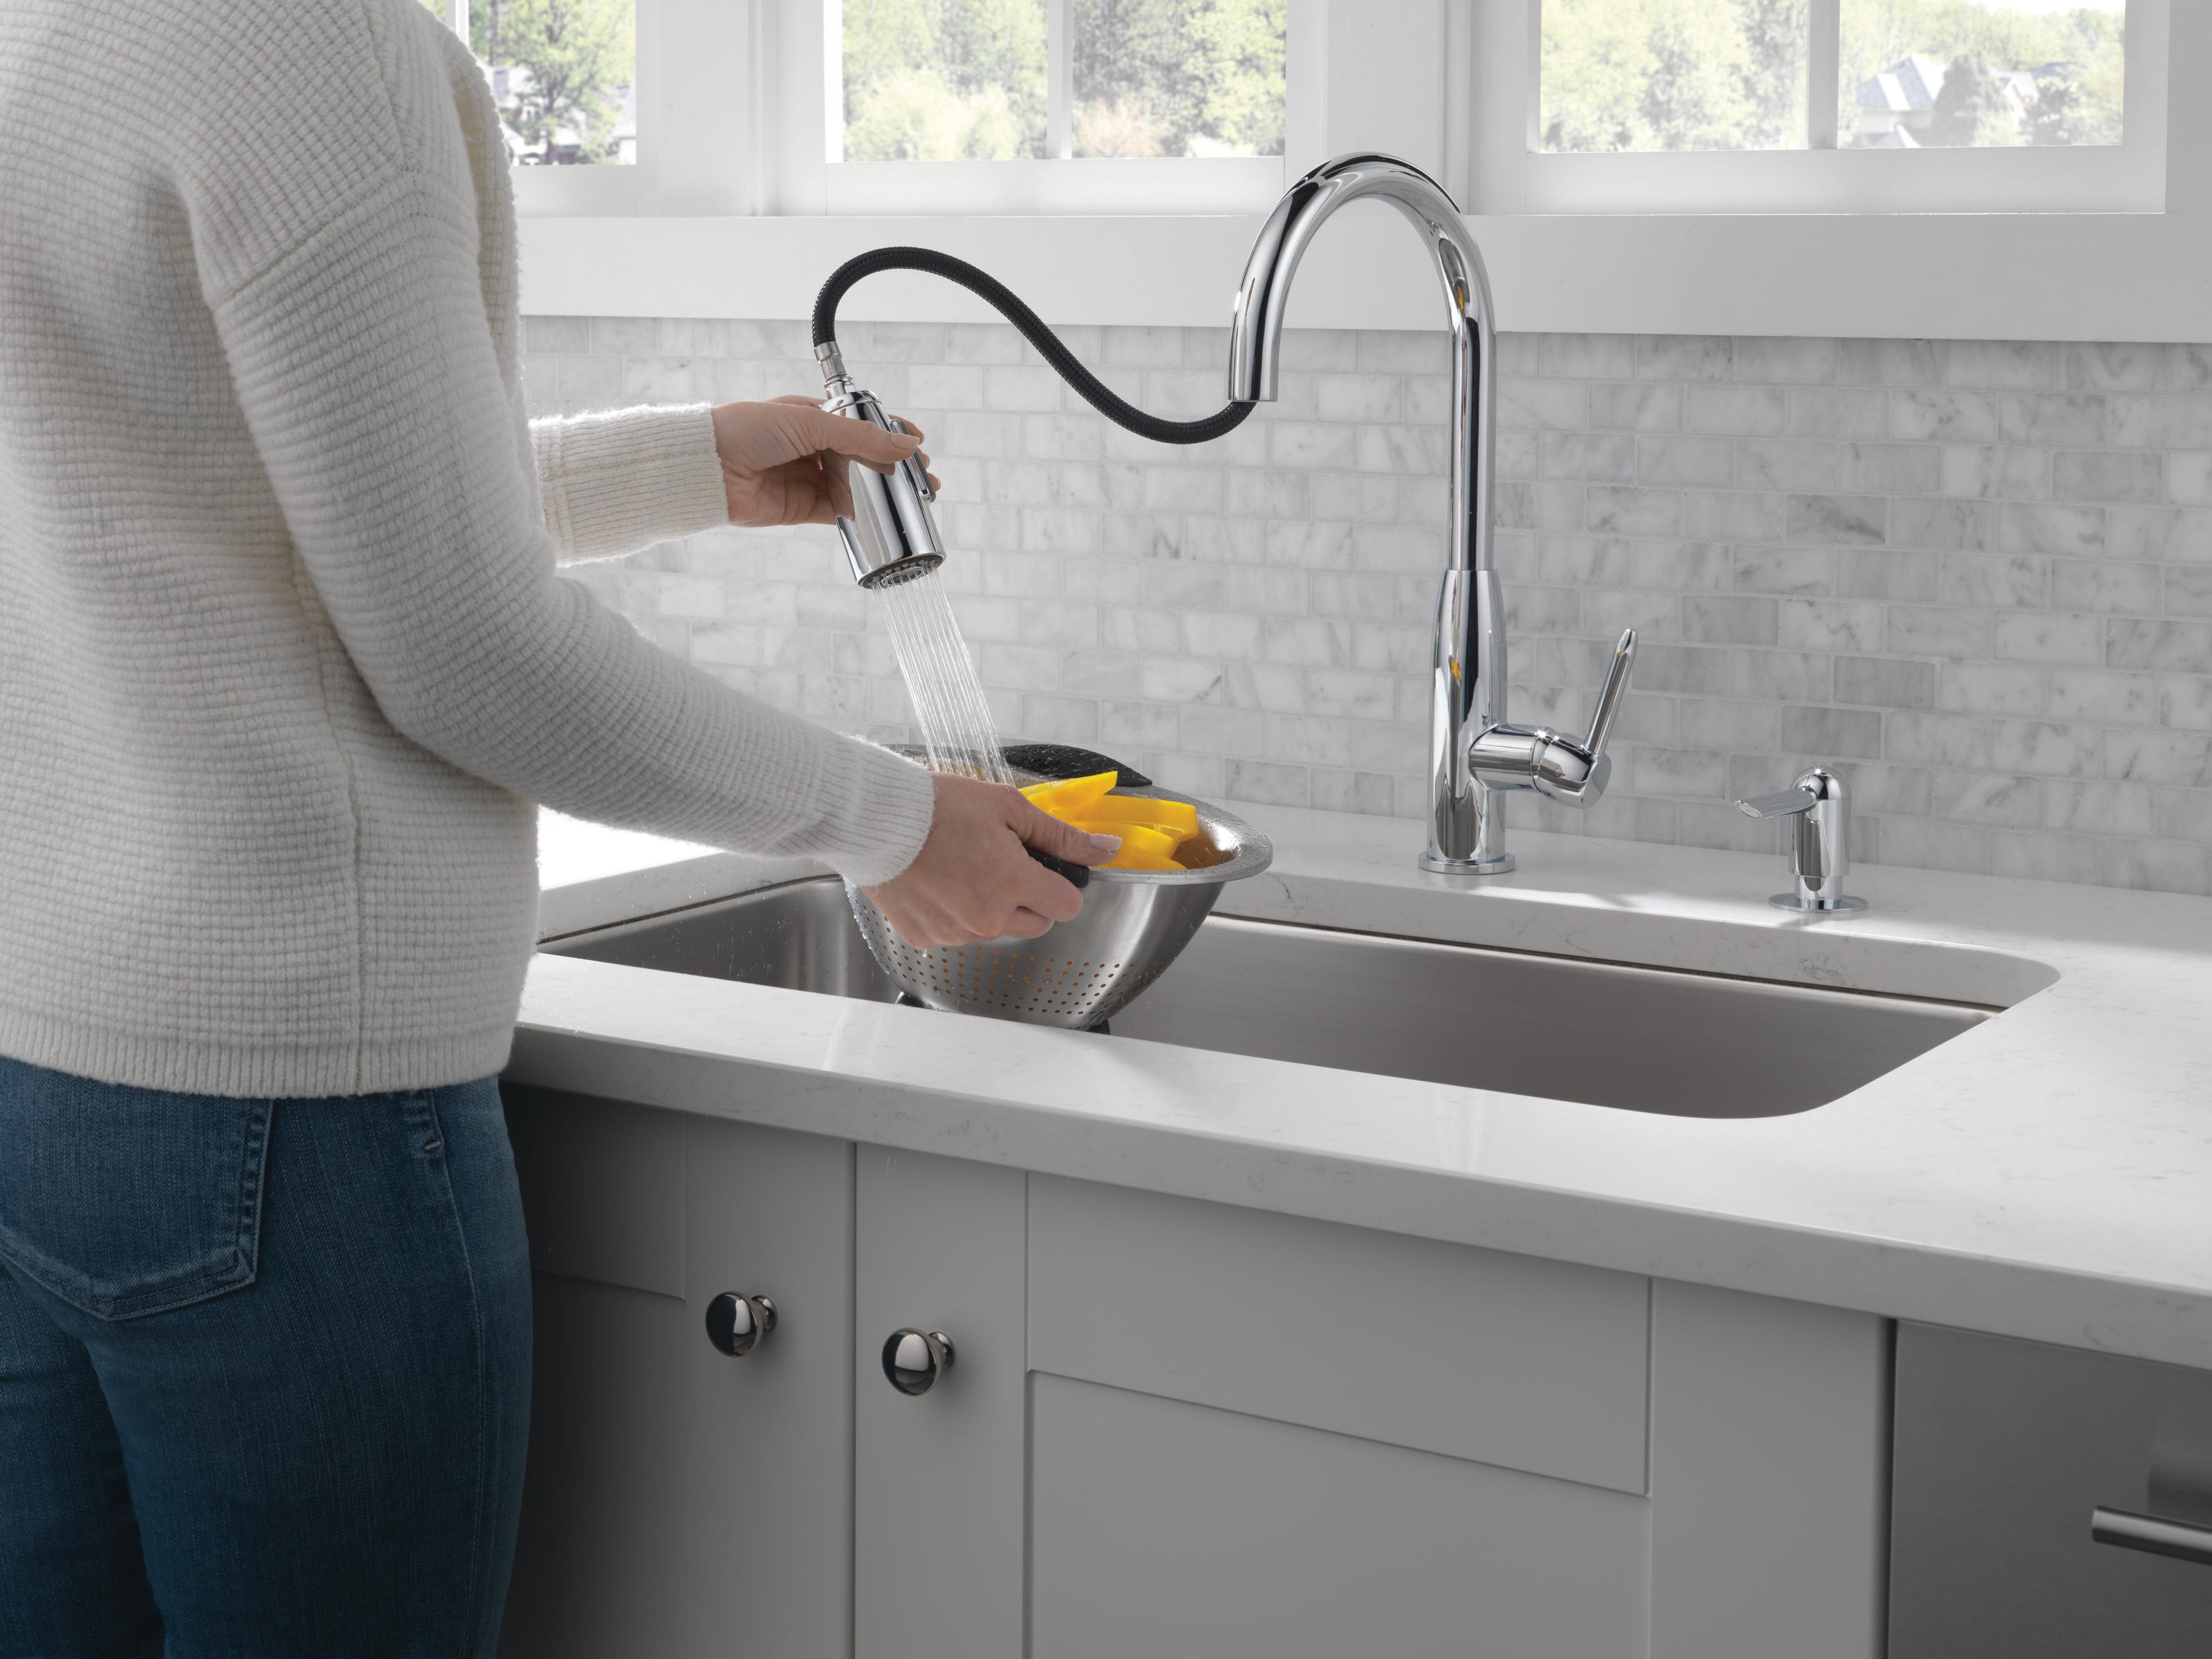 Peerless Core Kitchen Single Handle Pull-Down Faucet in Chrome P88103LF-SD-L - image 3 of 11